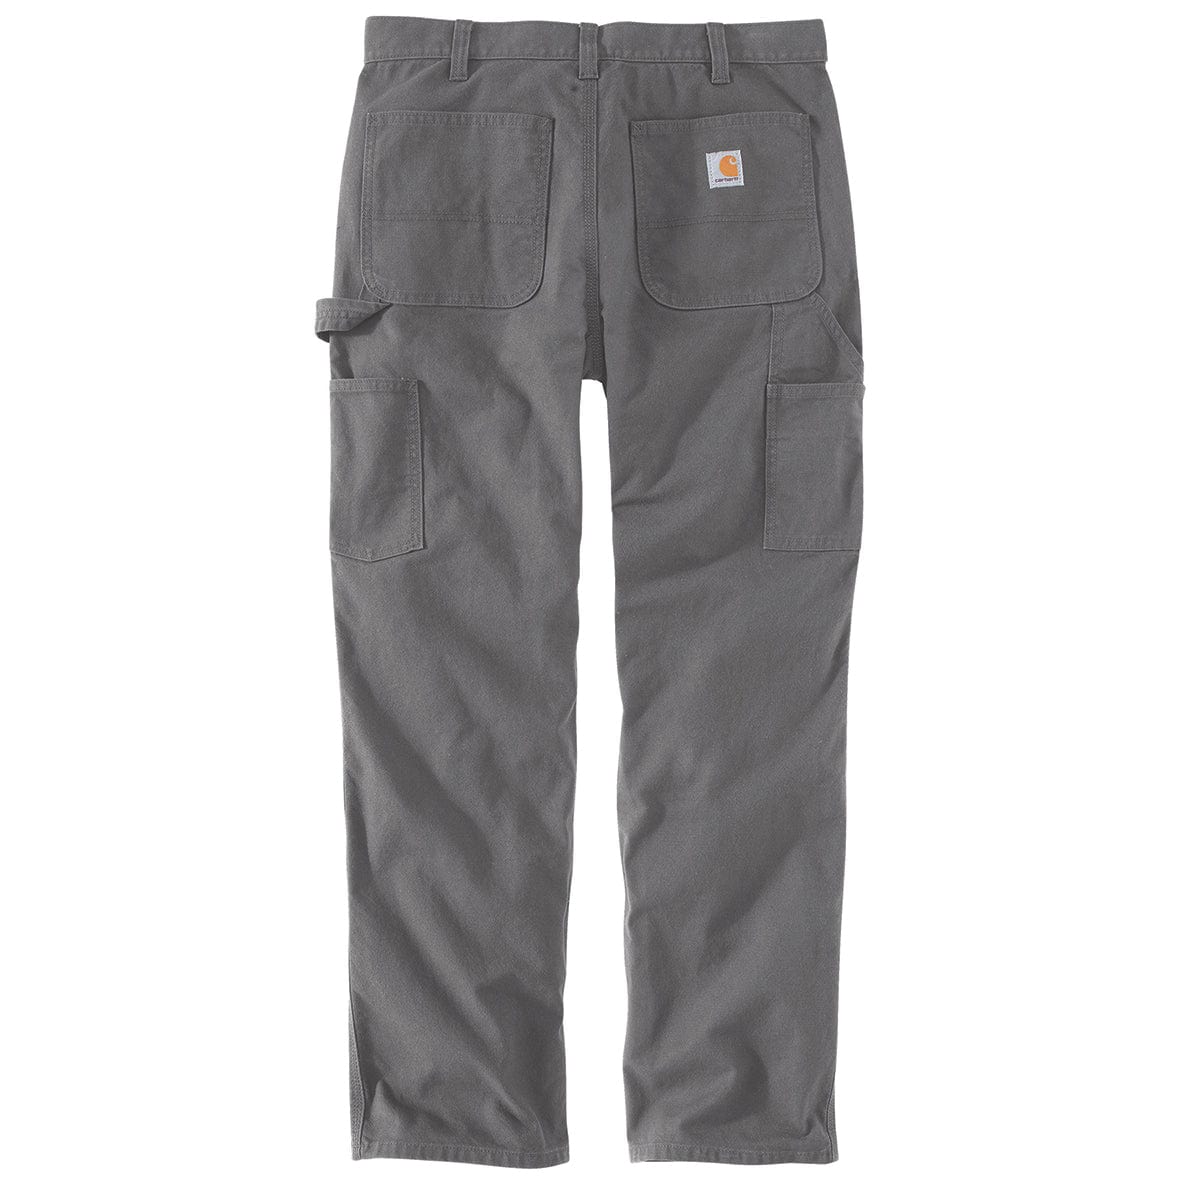 Carhartt Rugged Flex Relaxed Fit Duck Utility Work Pant, Gravel